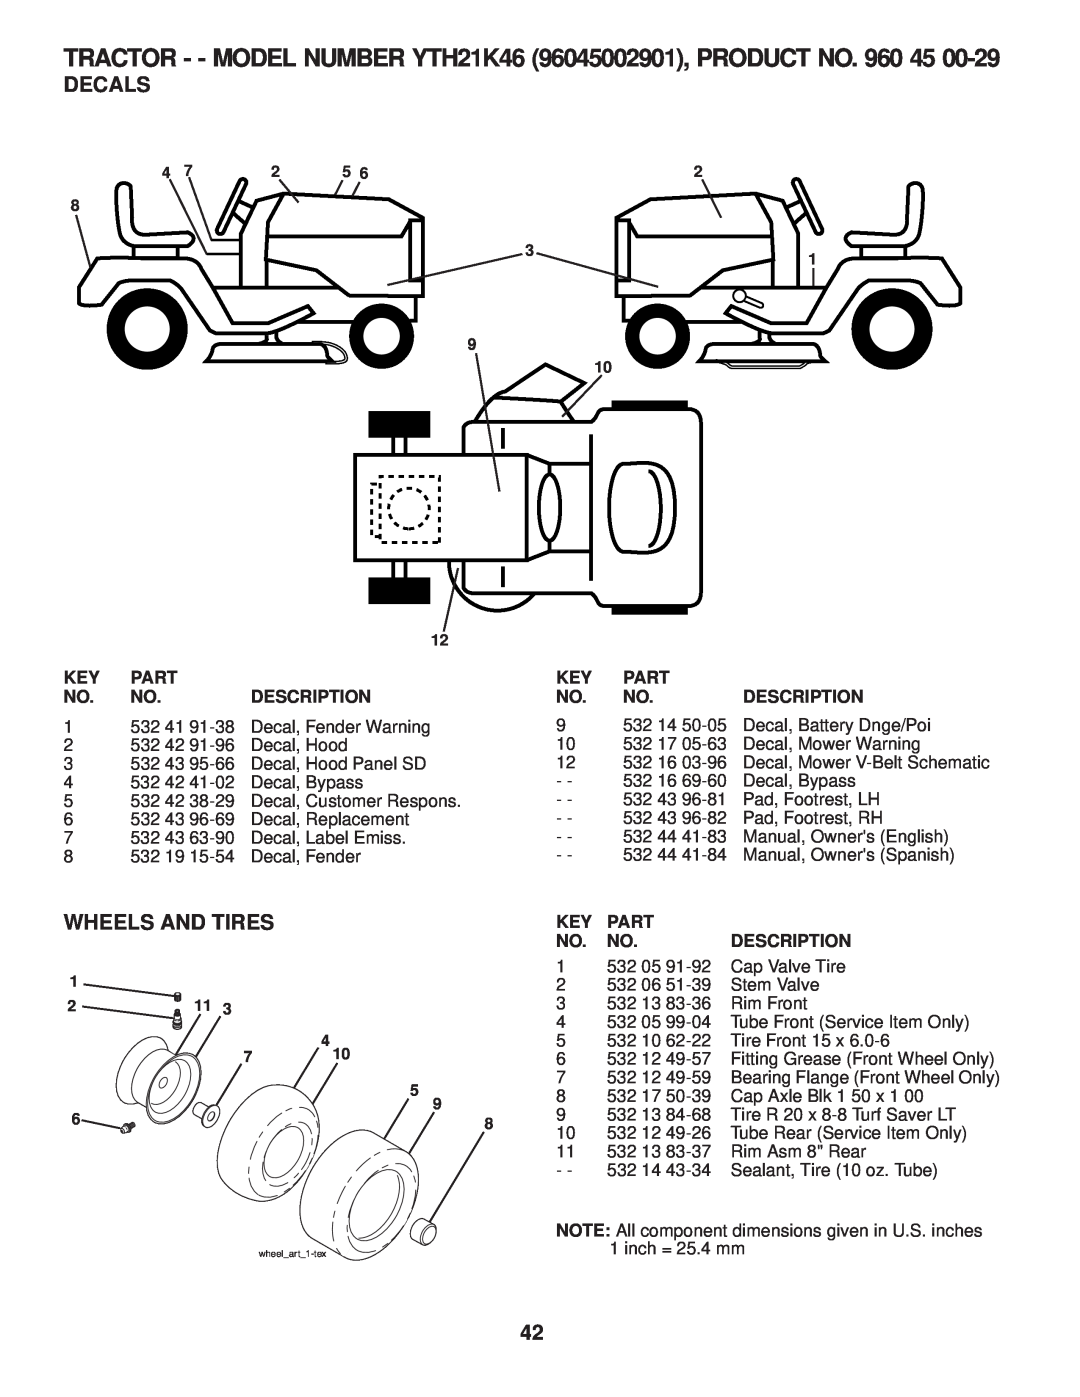 Husqvarna 960430120 owner manual Decals, Wheels And Tires 